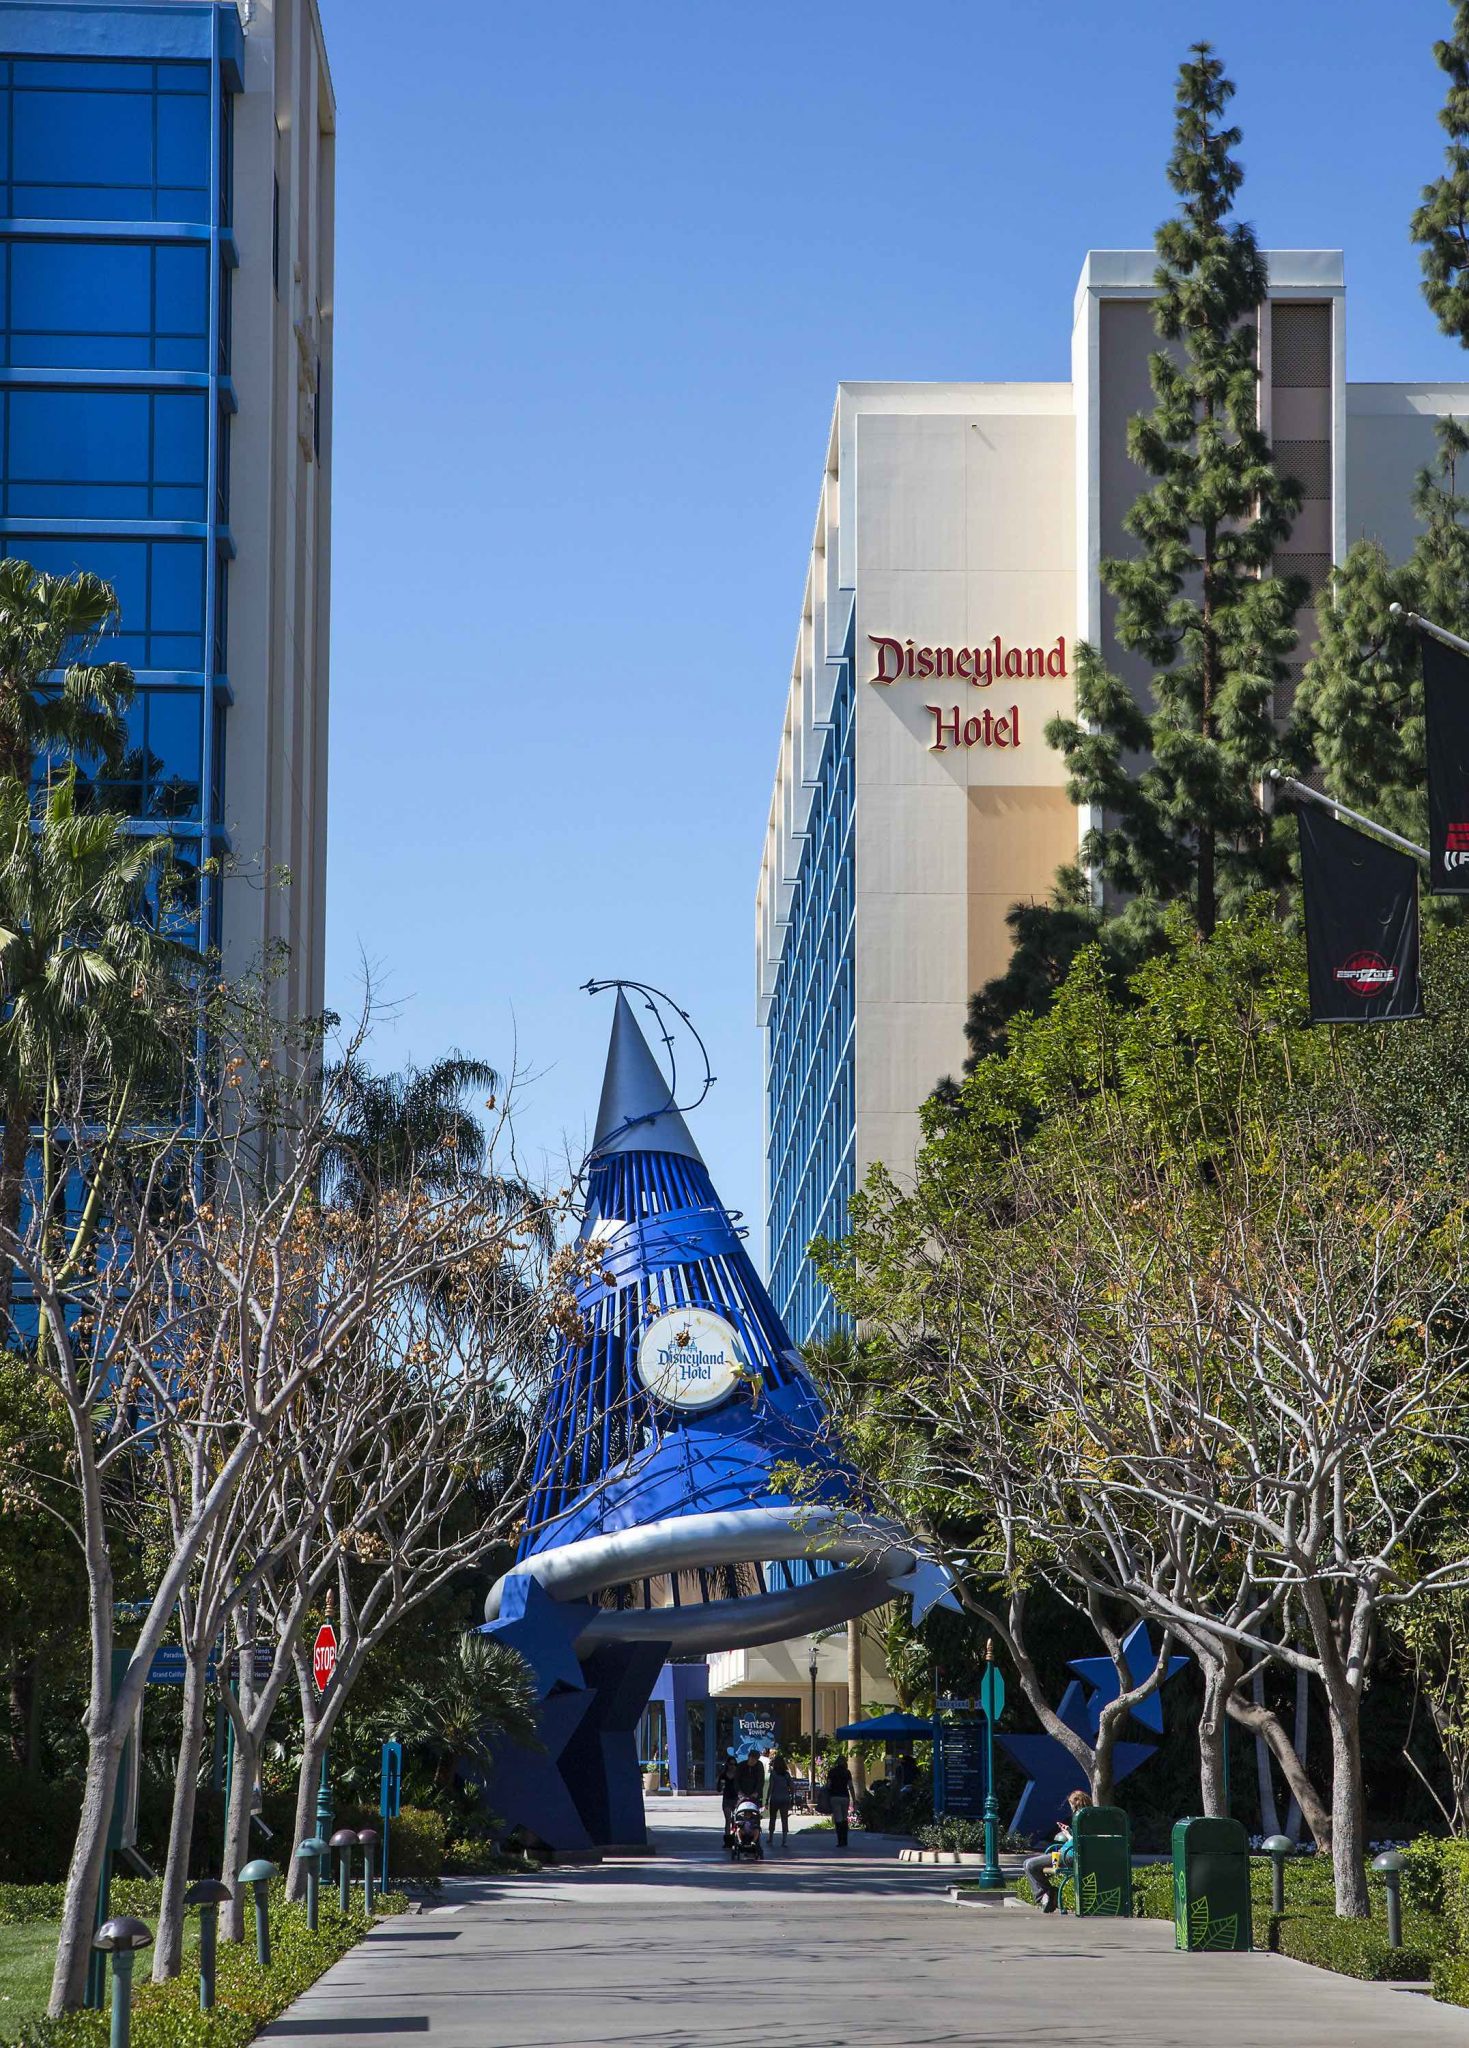 10 Reasons to Stay at the Disneyland Hotel featured by top US Disney blogger, Marcie and the Mouse: DISNEYLAND HOTEL––Follow Tinker Bell’s twinkling lights underneath the Sorcerer’s Hat to the Disneyland Hotel. Featuring three themed towers, a pool-and-slide water play area, Tangaroa Terrace and Trader Sam’s bar, the Disneyland Hotel is one of three Disneyland Resort Hotels conveniently located near Disneyland and Disney California Adventure parks and the Downtown Disney District. (Paul Hiffmeyer/Disneyland Resort)